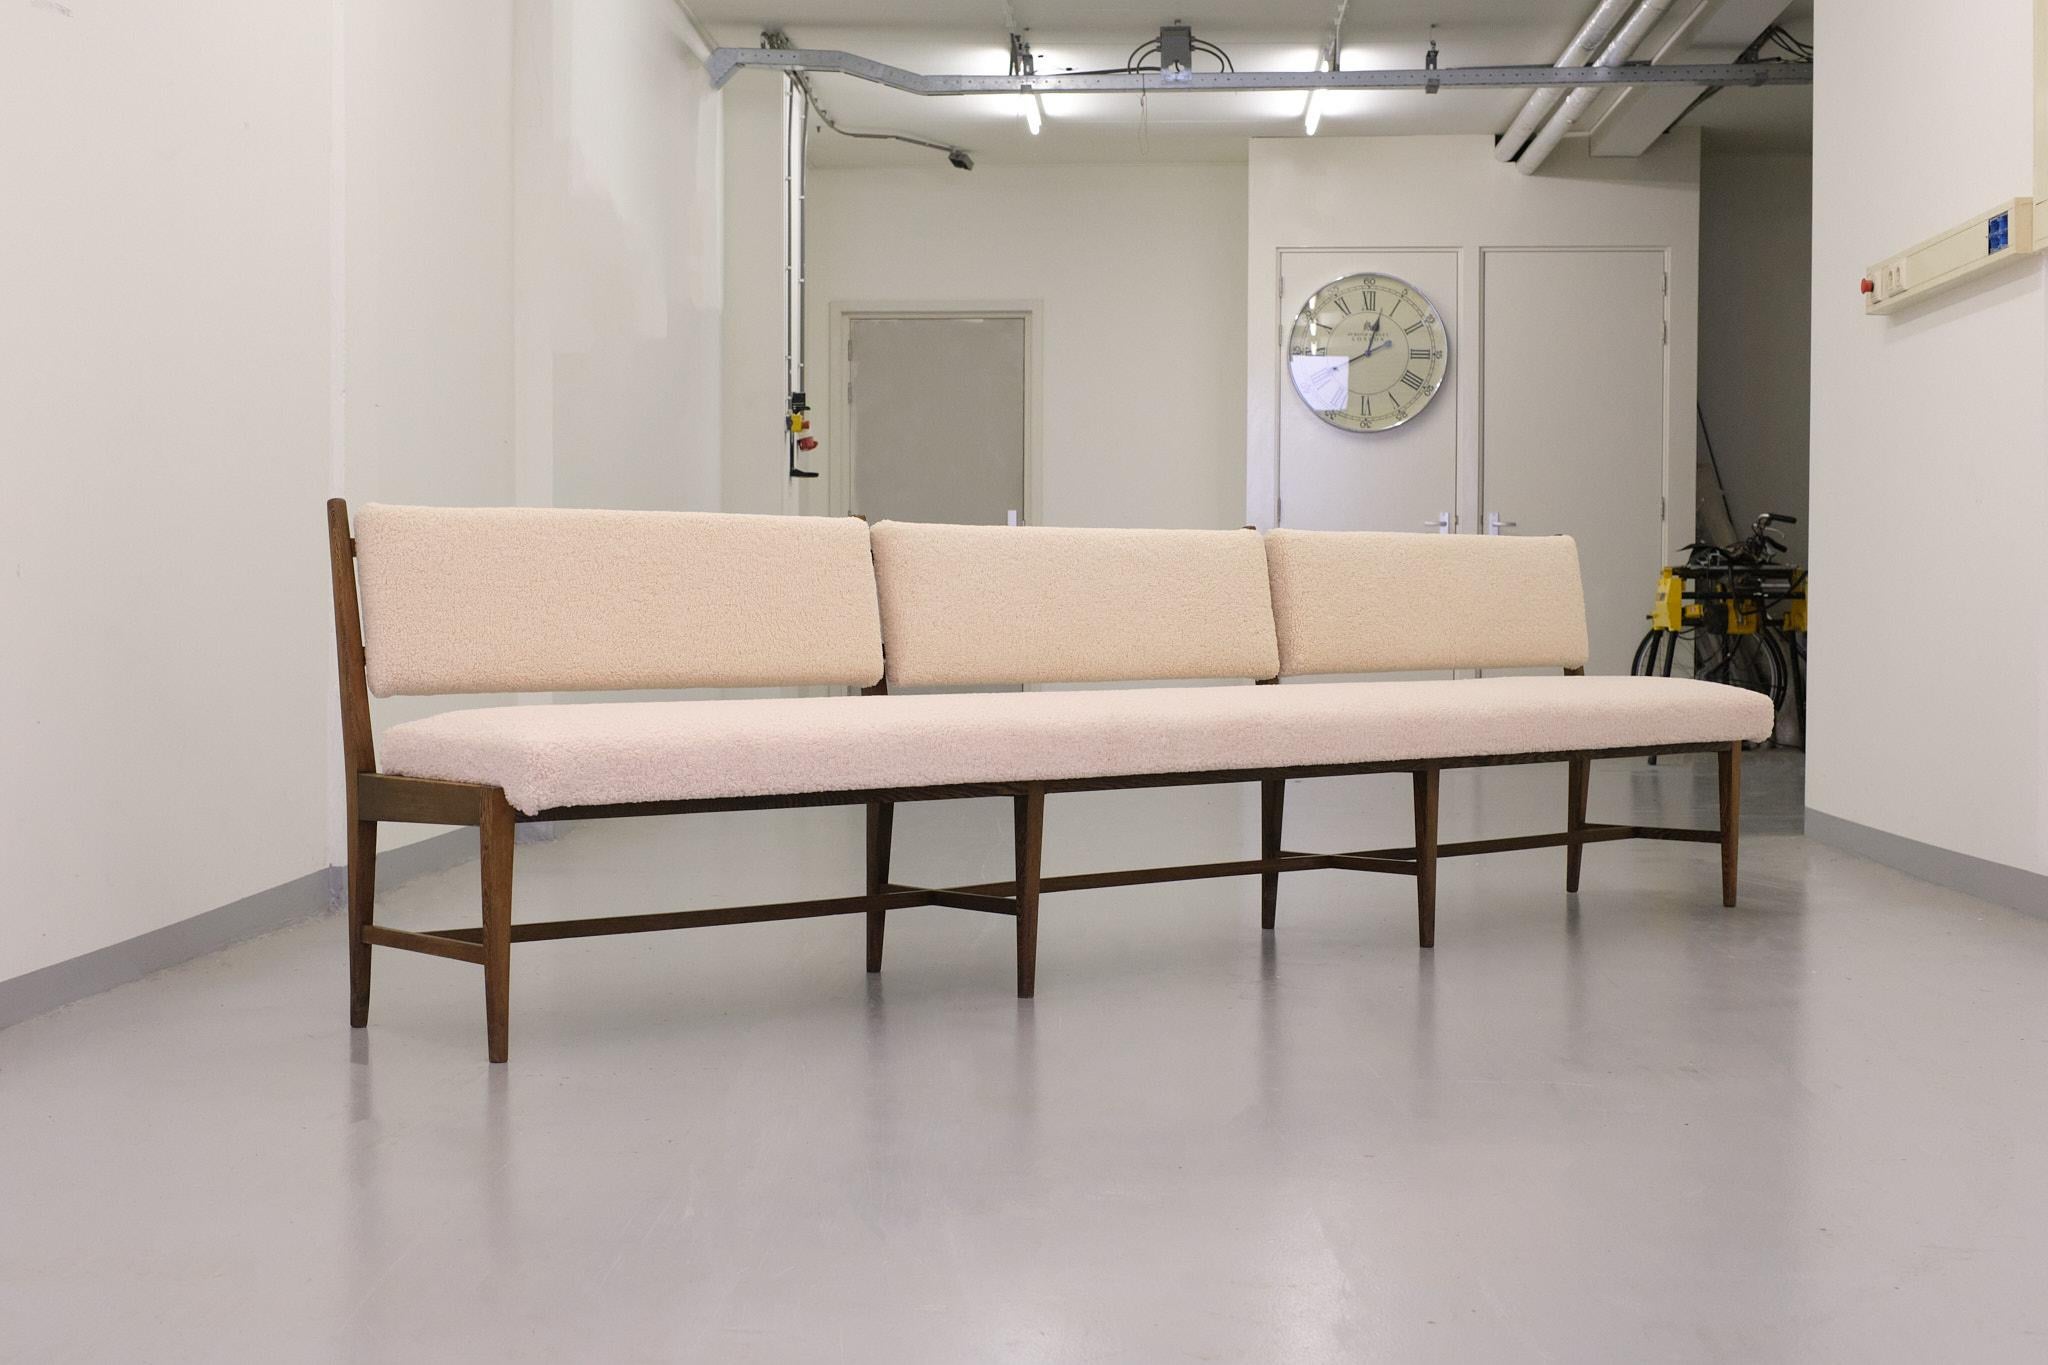 Exceptionally Large Modernist sofa Width 123.2 inch = 313 cm Brand new Sheepskin like upholstery. The frame is made of solid Wengé. Nice minimalist design.
 